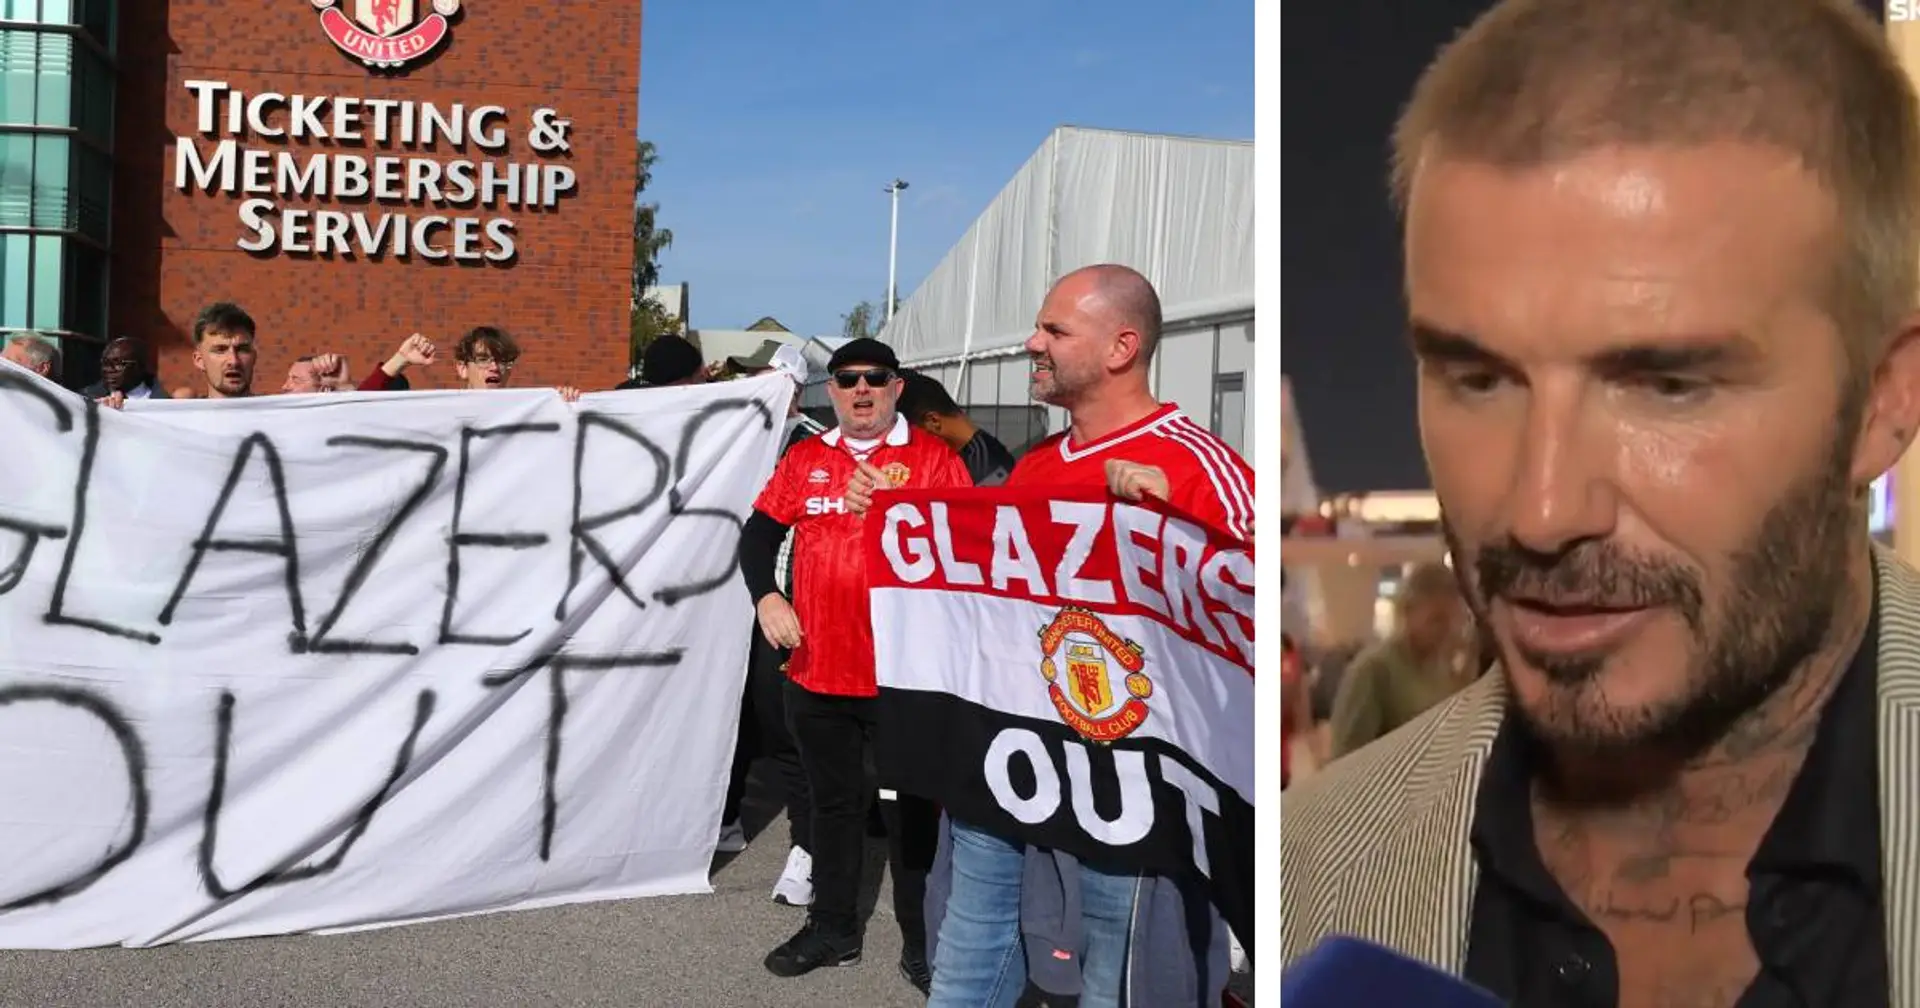 'We need stability': David Beckham hints at Qatari takeover in strong anti-Glazers message